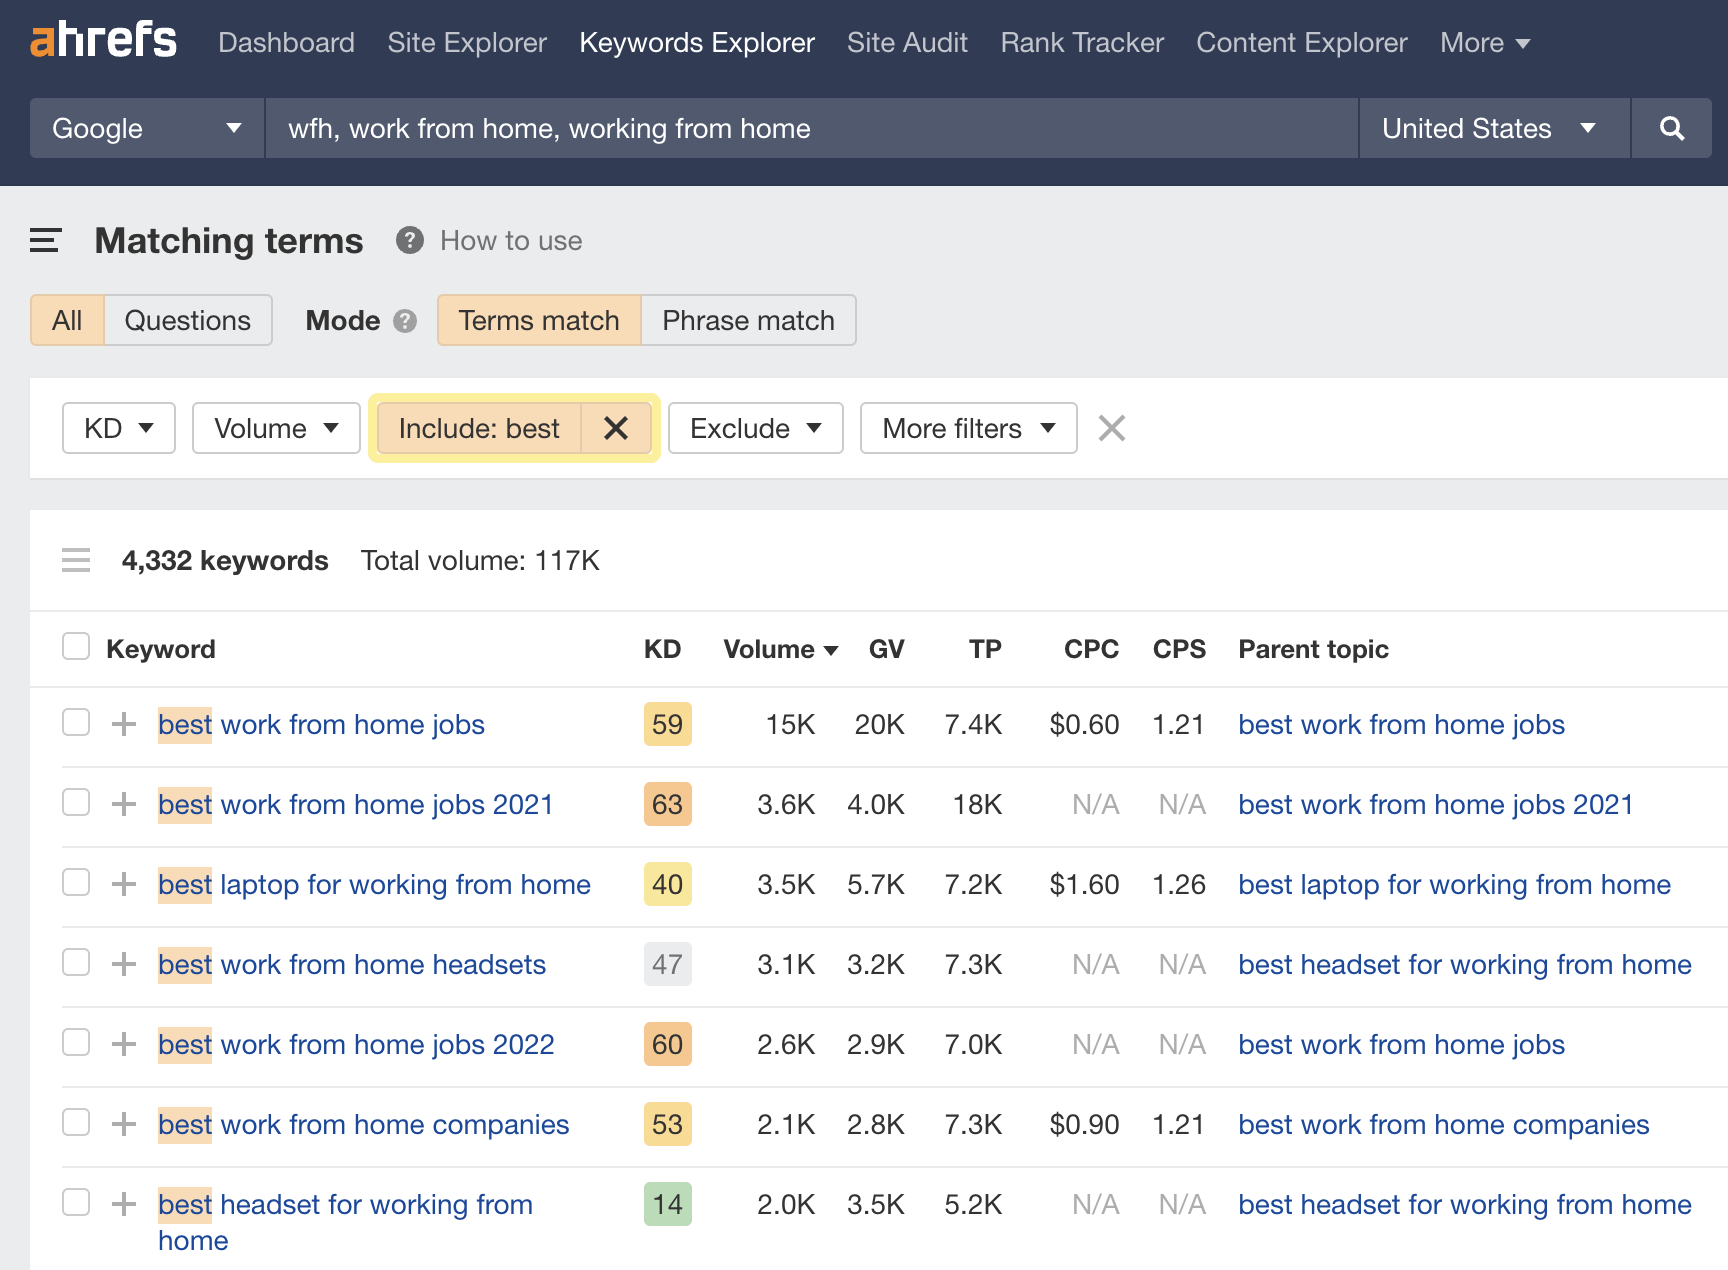 Matching terms report for work from home–related keywords with "Include" filter applied, via Ahrefs' Keywords Explorer
